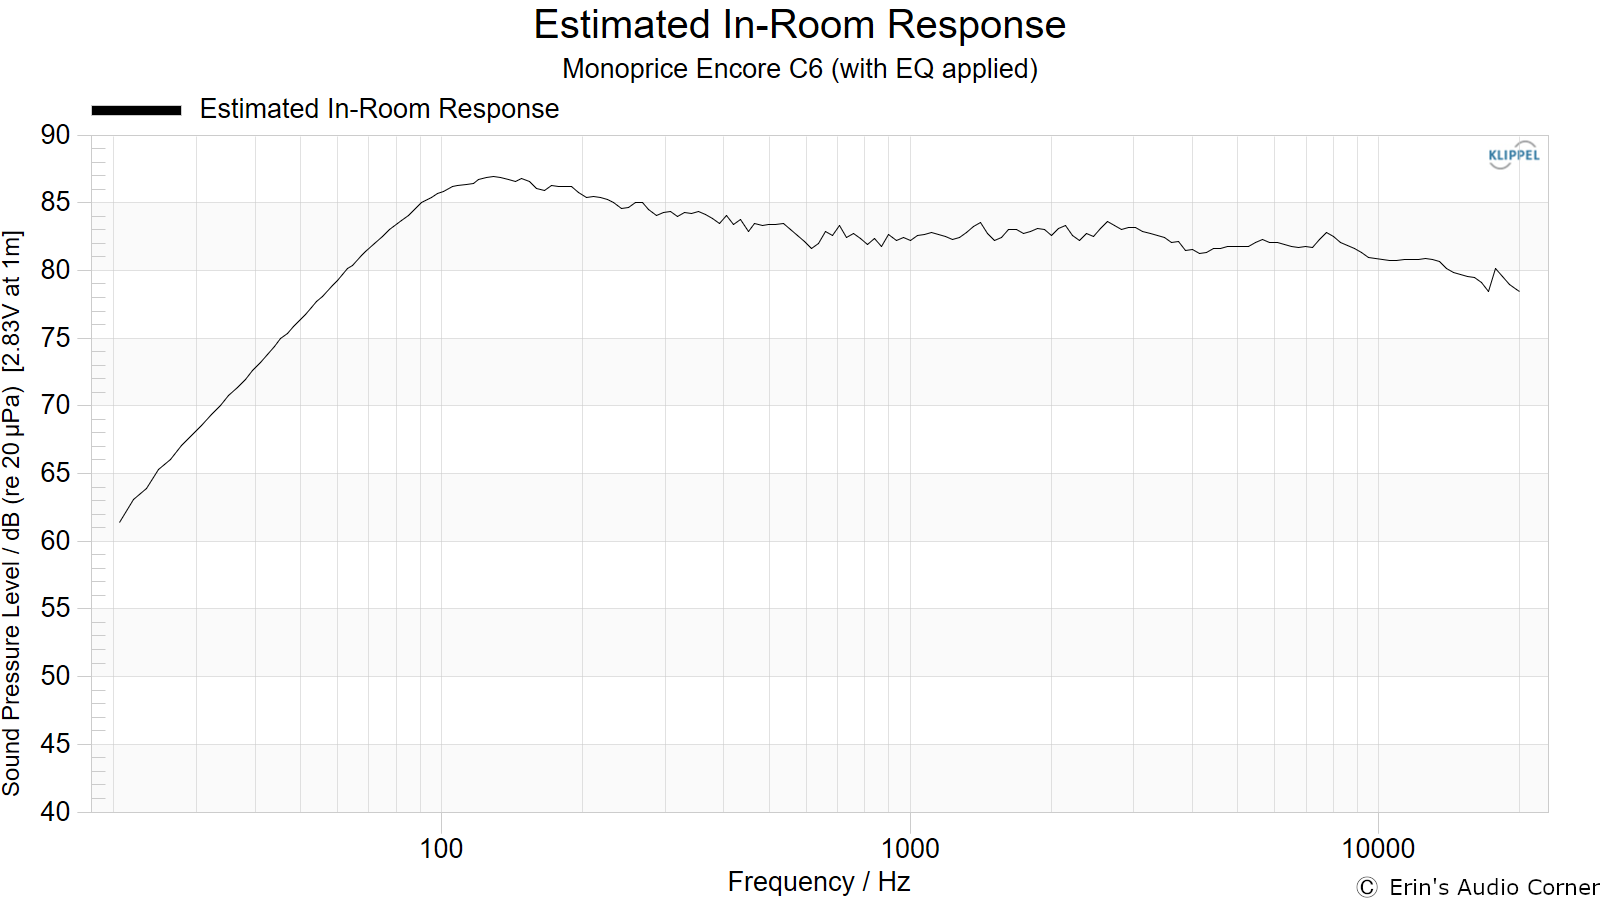 Estimated%20In-Room%20Response%20with%20EQ.png